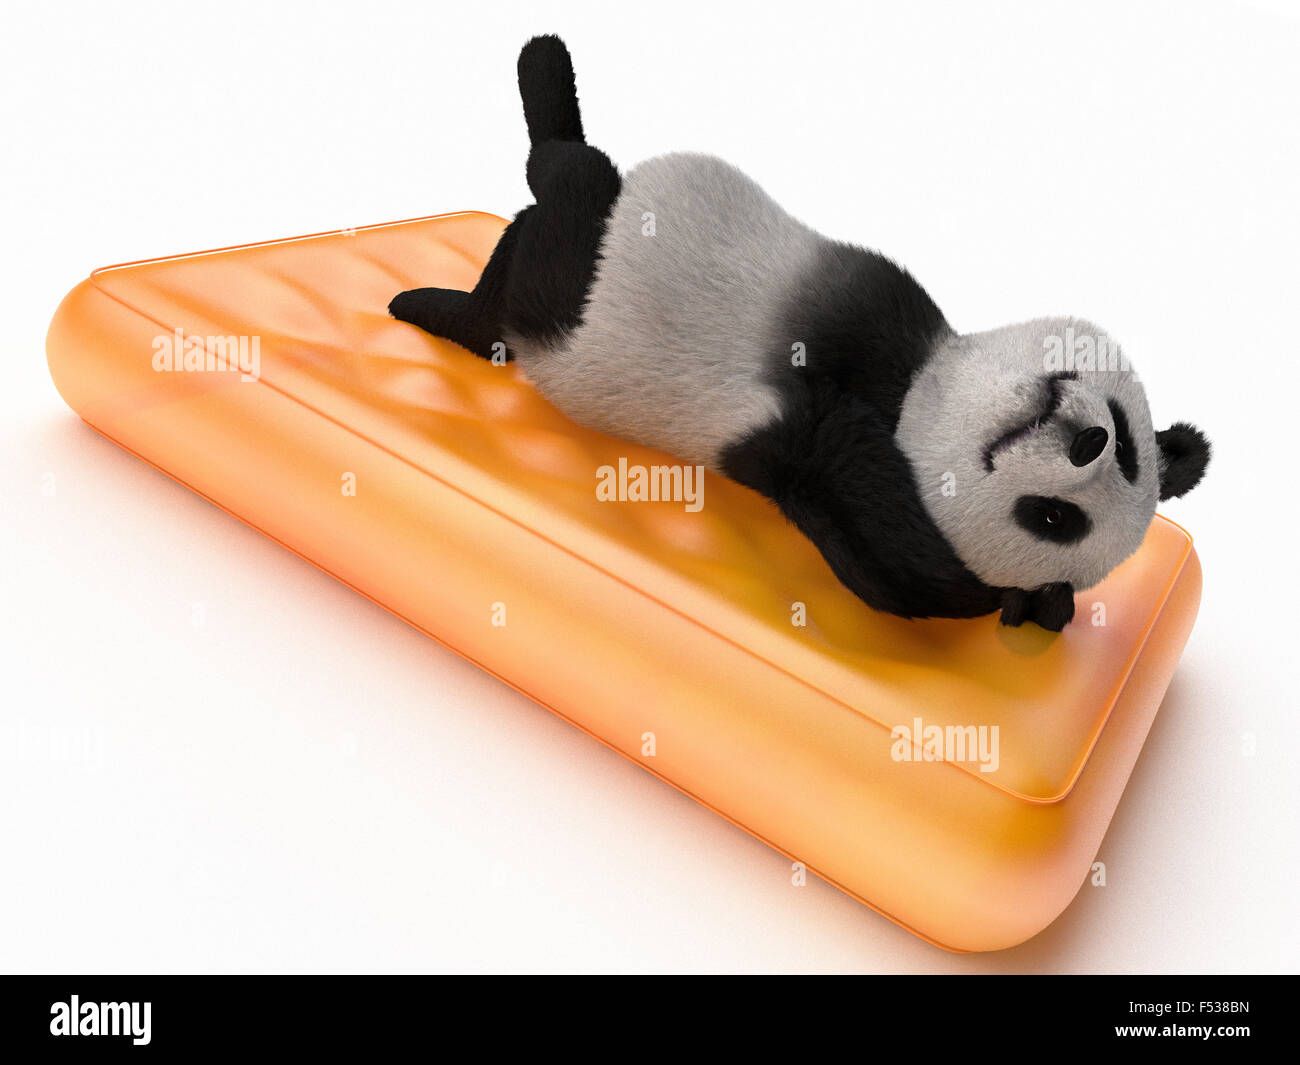 relaxed bear lying on back with hands clasped behind head on orange translucent inflatable mattress. mammal animal resting on be Stock Photo